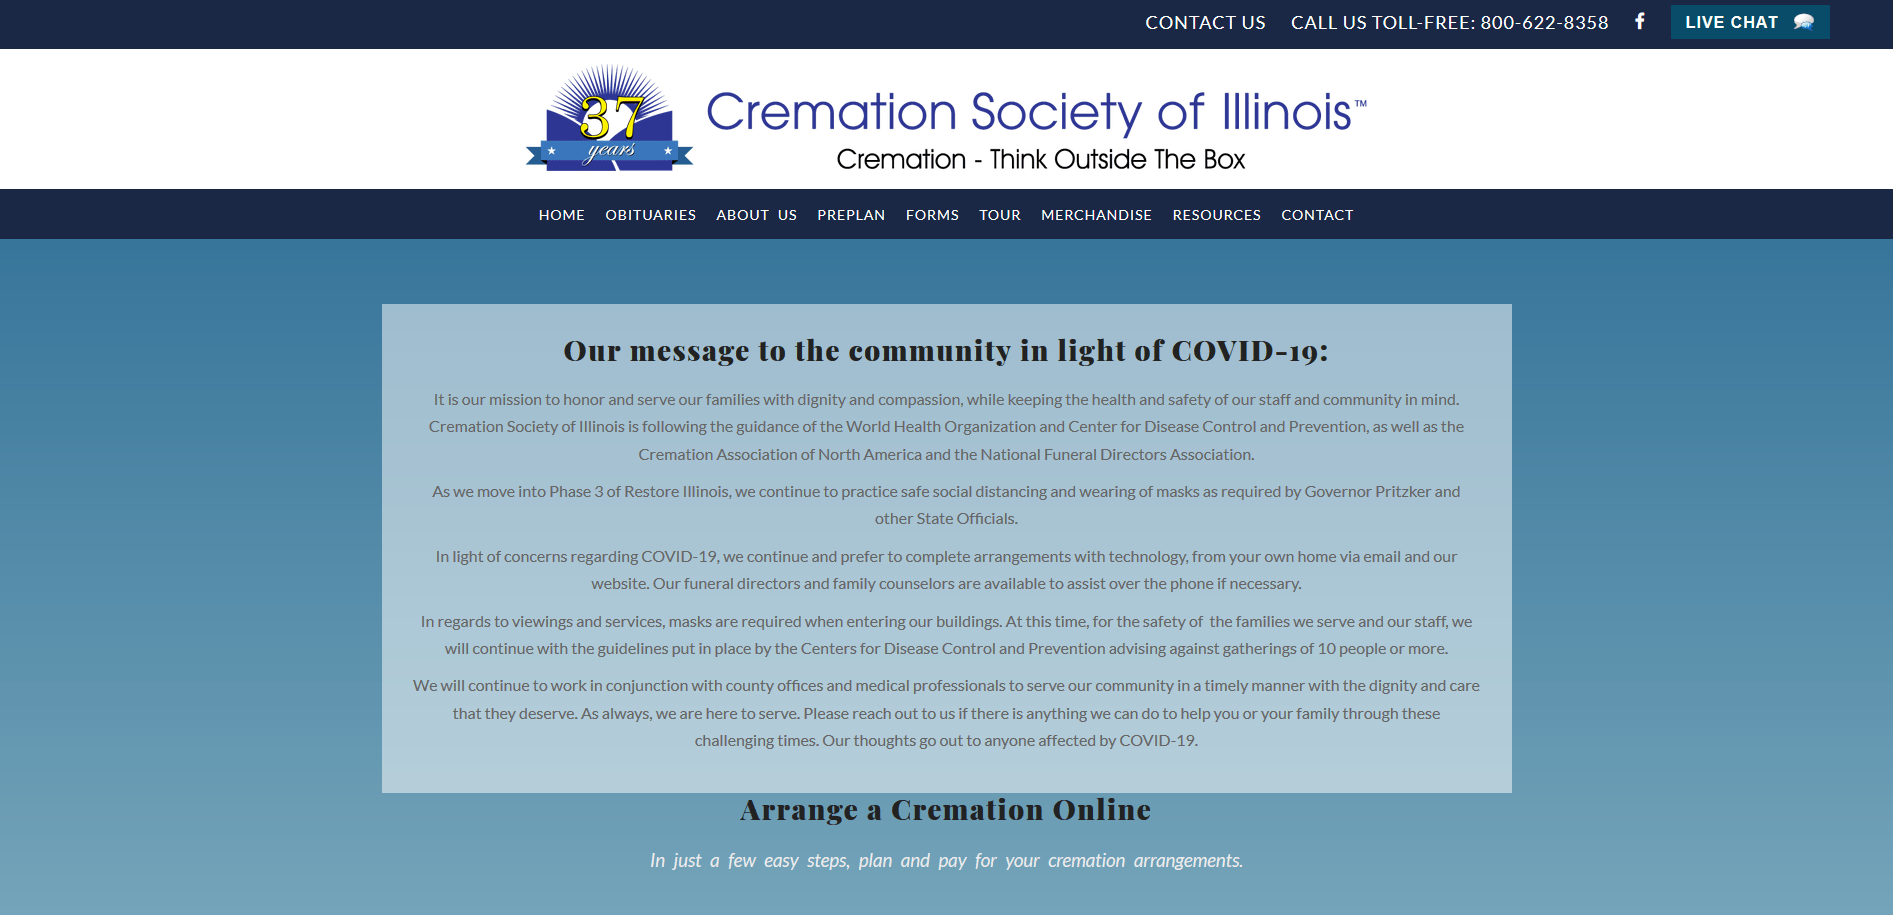 Cremation Society of Illinois SRS Website